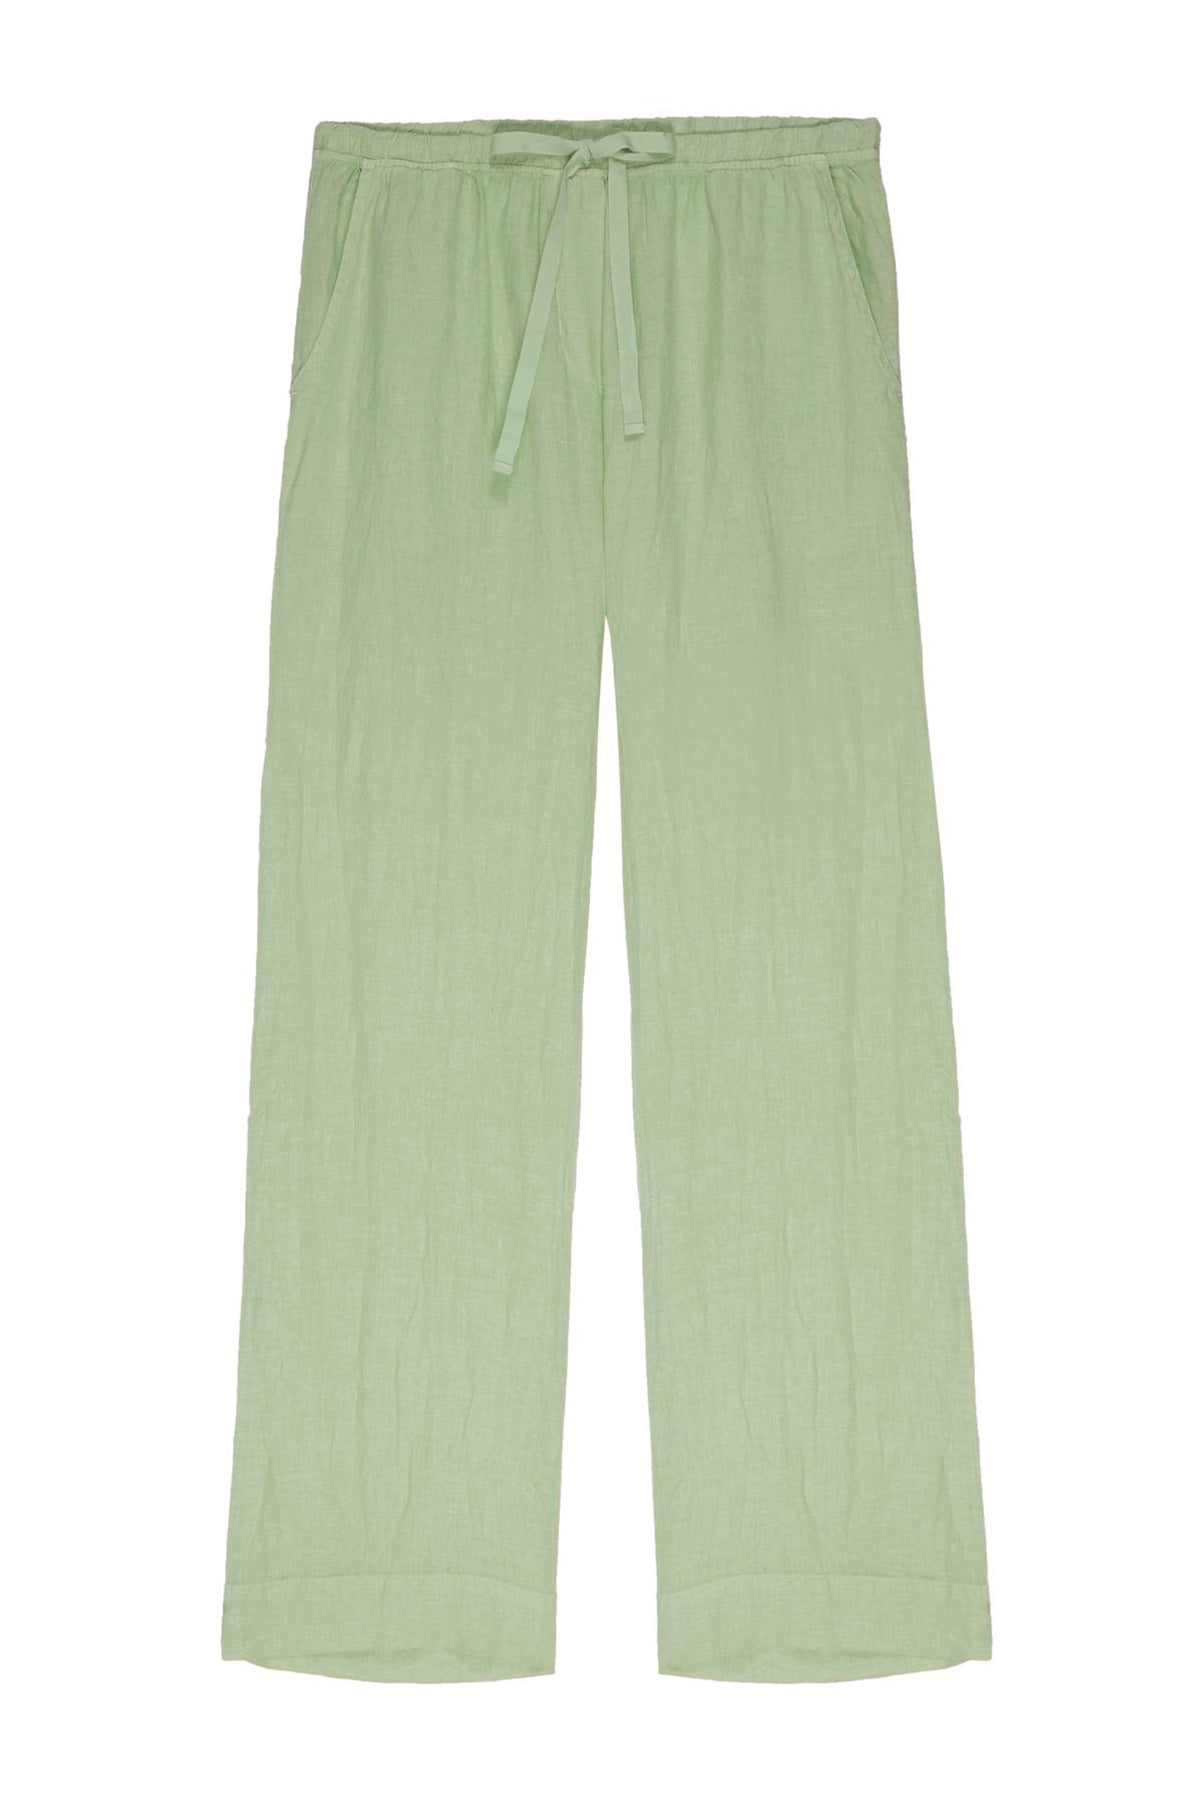 Light green Velvet by Jenny Graham PICO PANTS with an elastic waist, displayed flat on a white background.-36580165419201